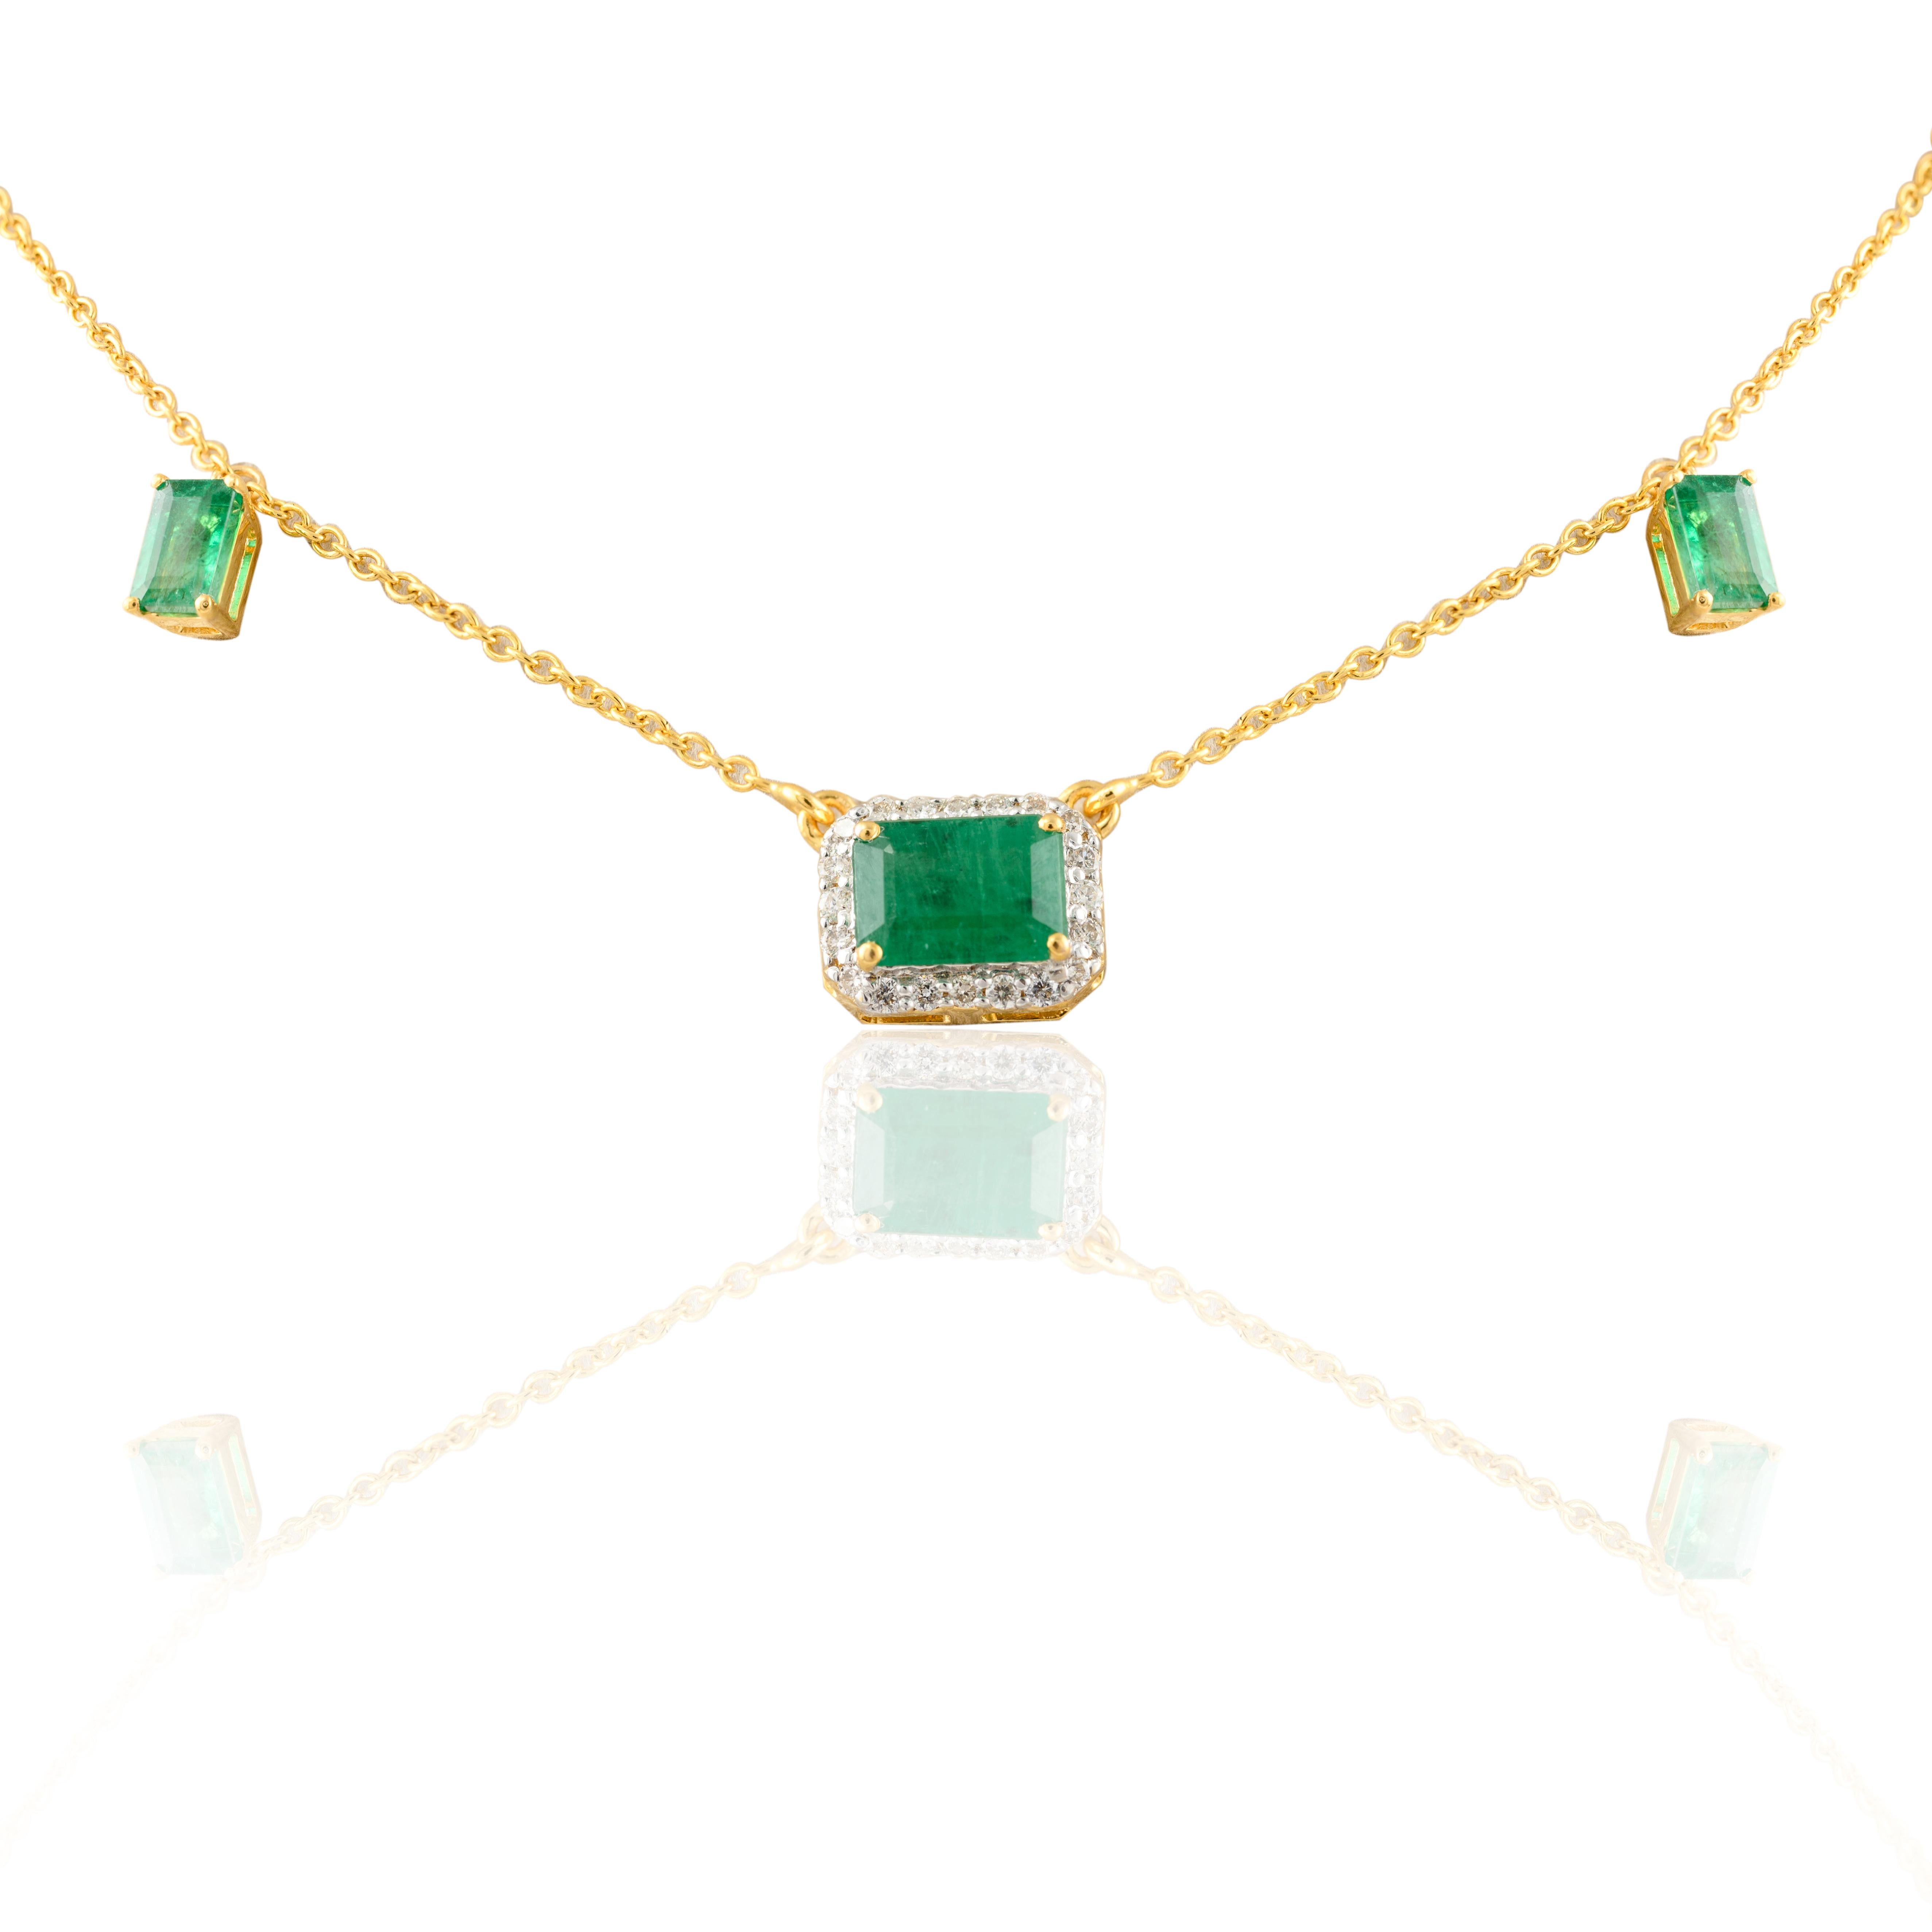 Women's Emerald Charm Necklace 14k Yellow Gold, Emerald Fine Jewelry Gift For Women For Sale